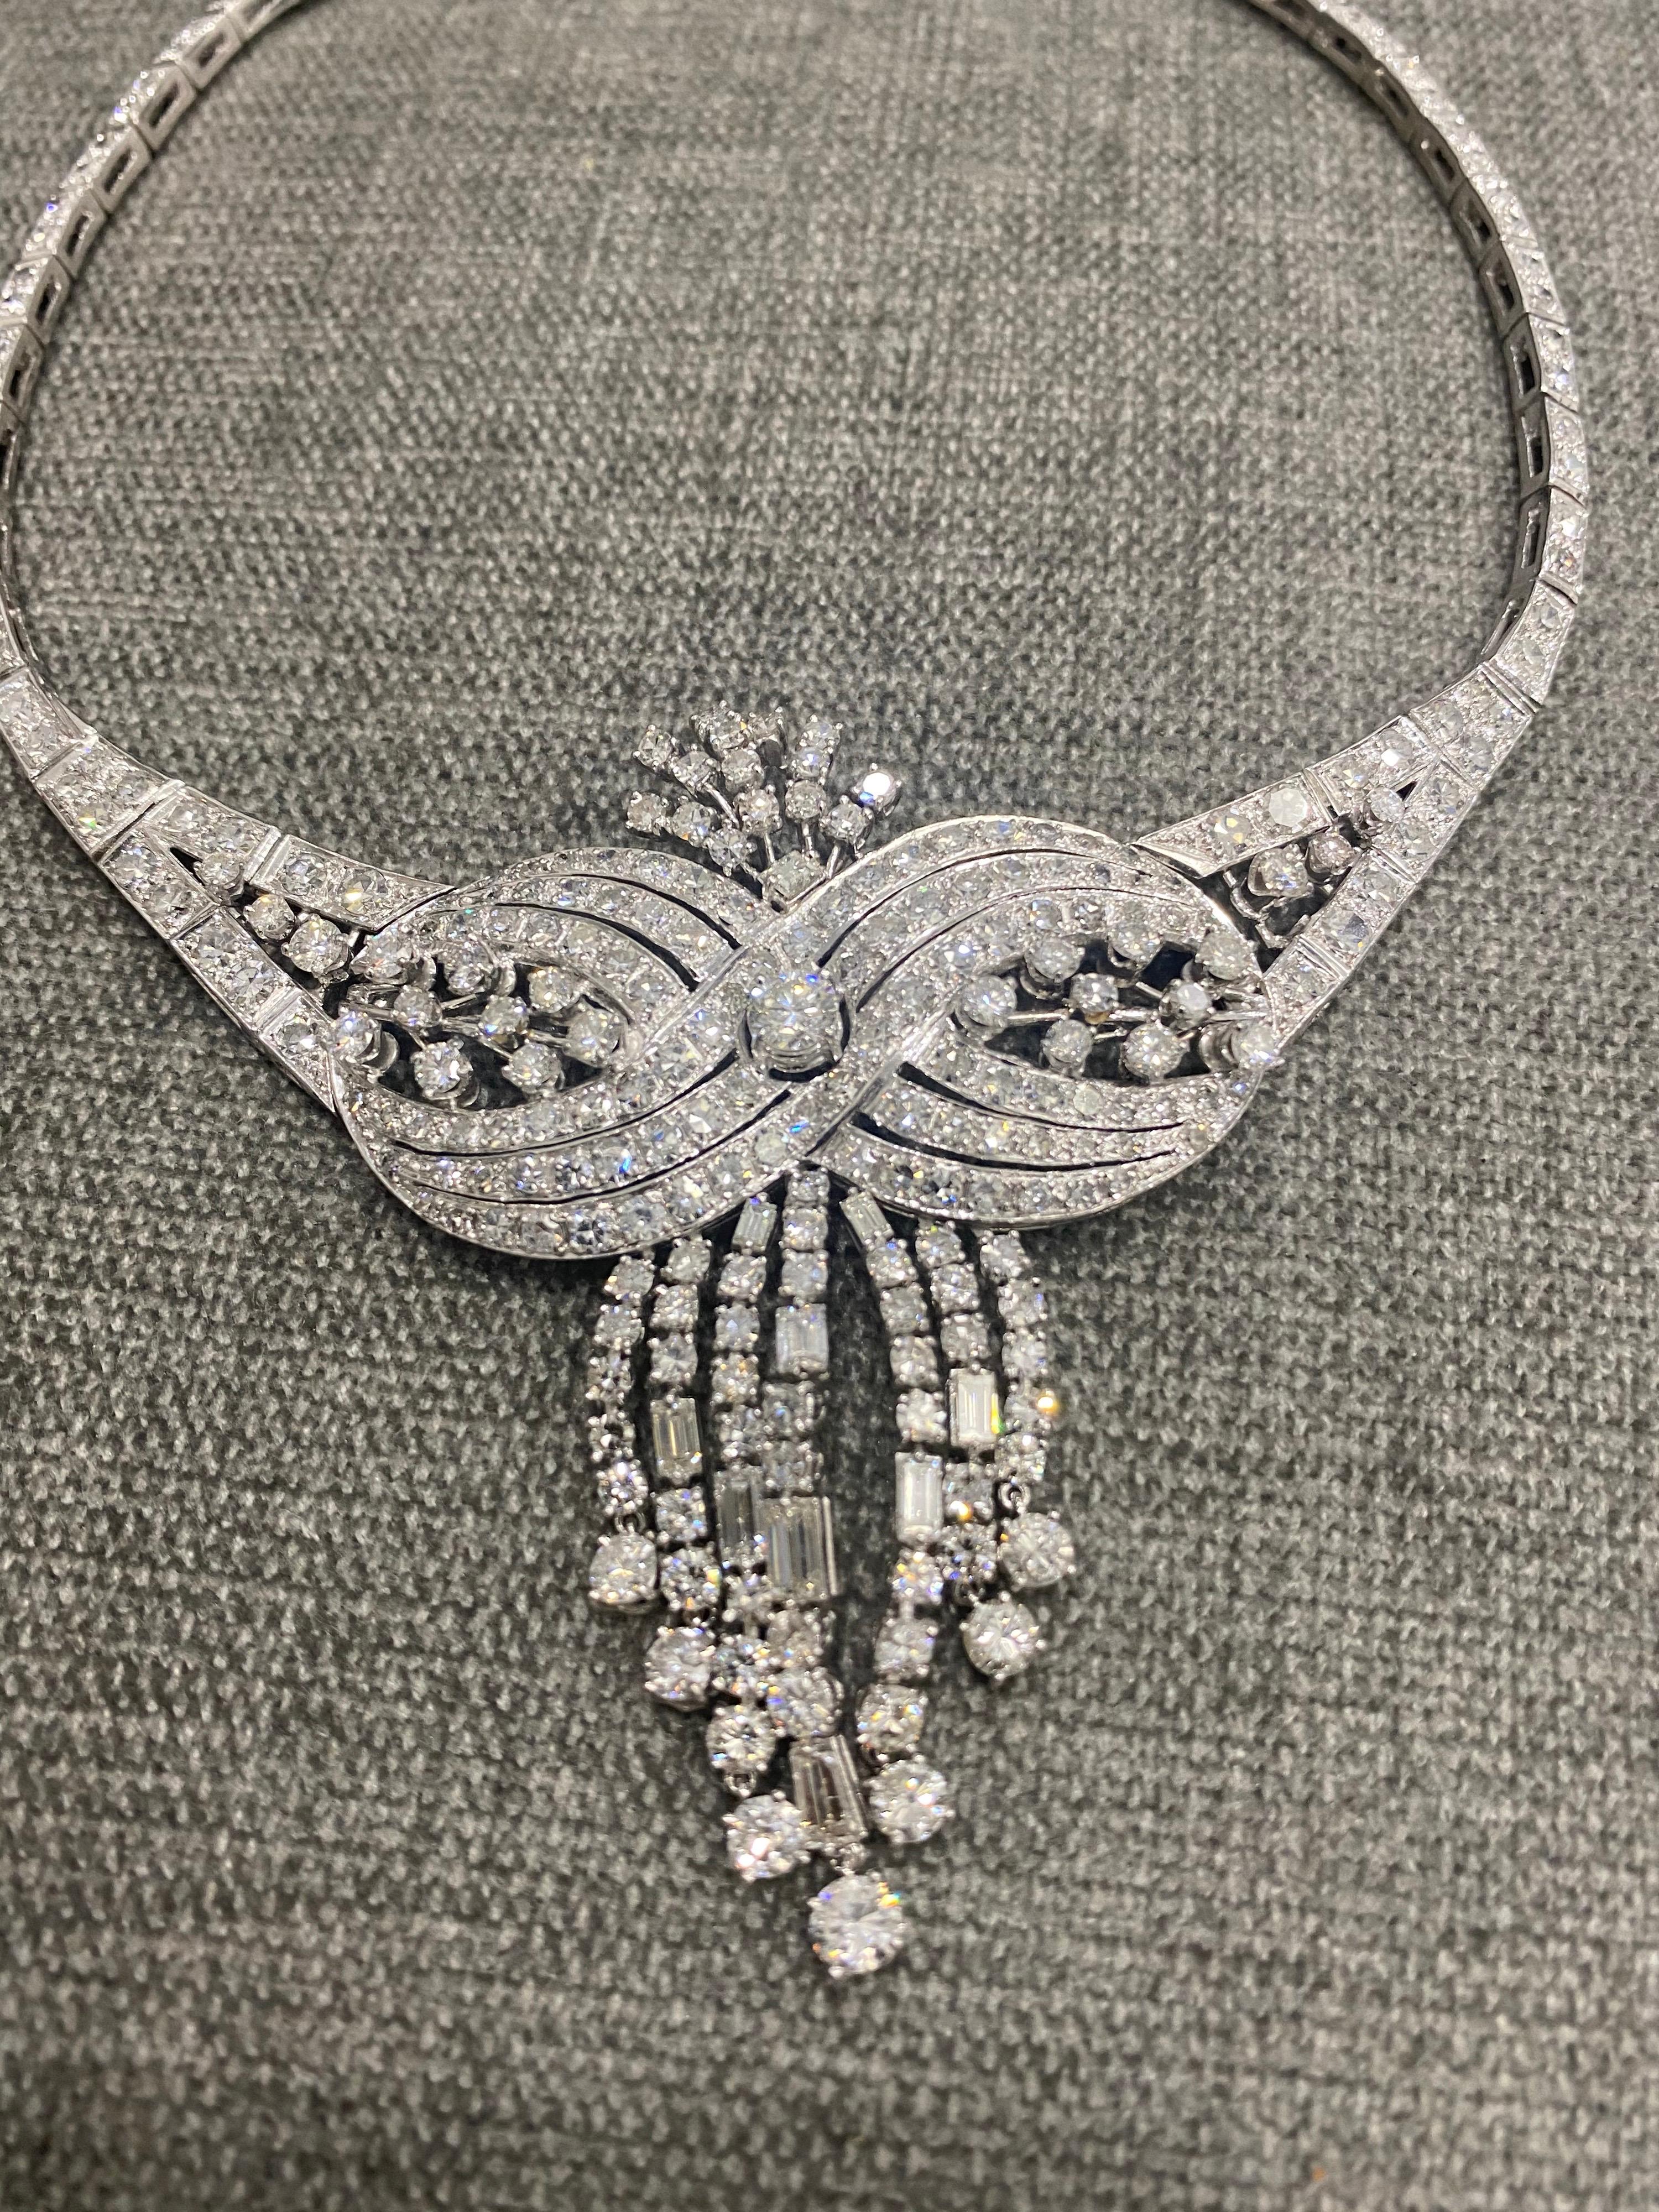 A look that is truly spectacular — this original Circa 1950's vintage platinum and diamond necklace includes approximately 19.20+ carats total weight in brilliant round- and single-cut diamonds, with larger baguette-cuts dripping down the front, for